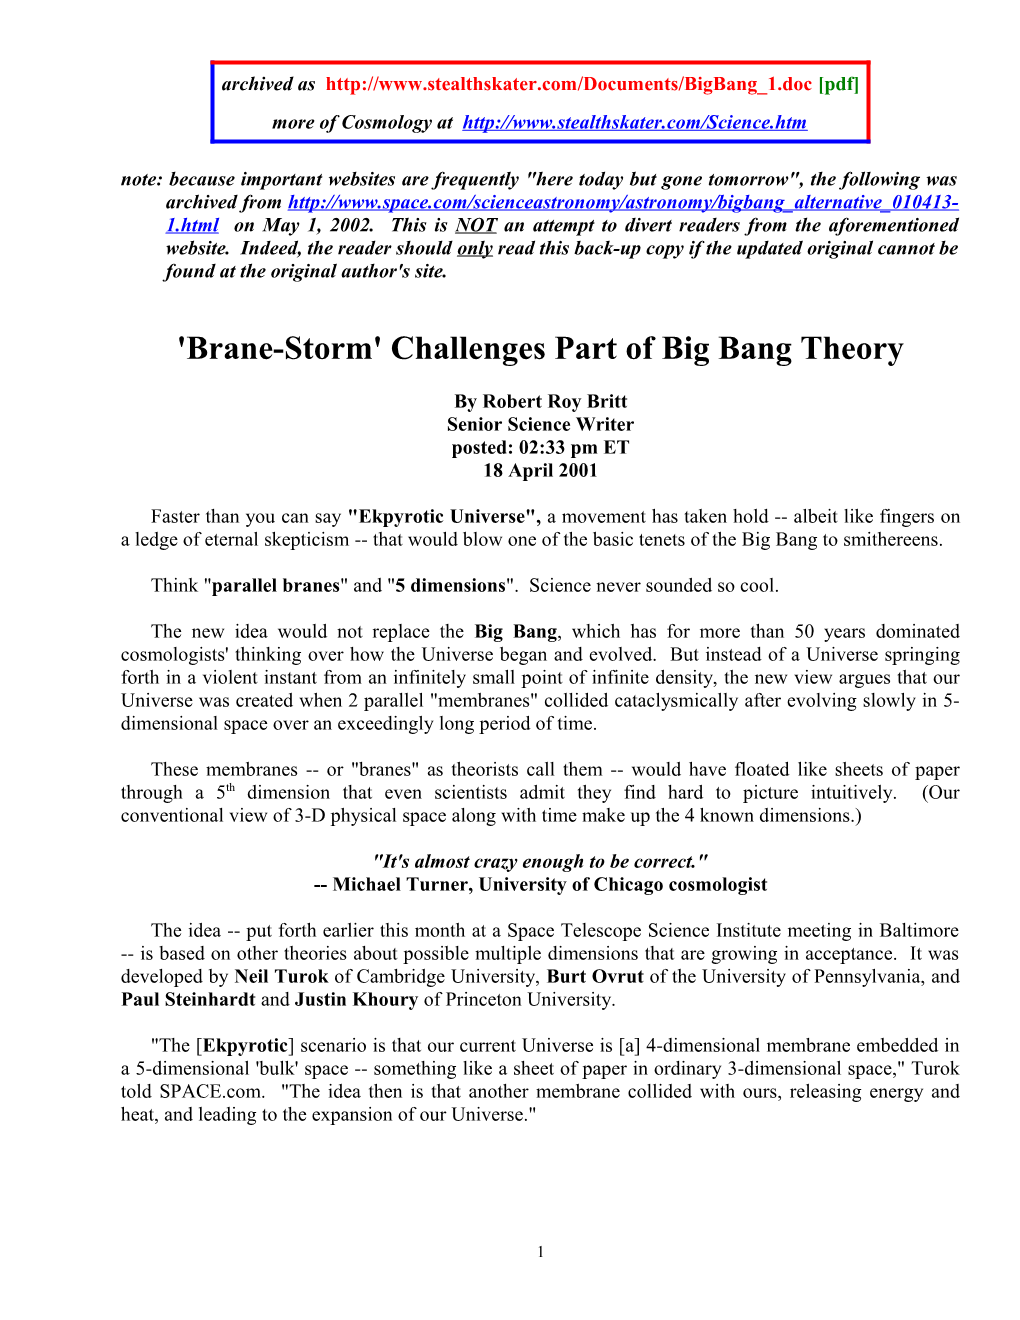 'Brane-Storm' Challenges Part of Big Bang Theory